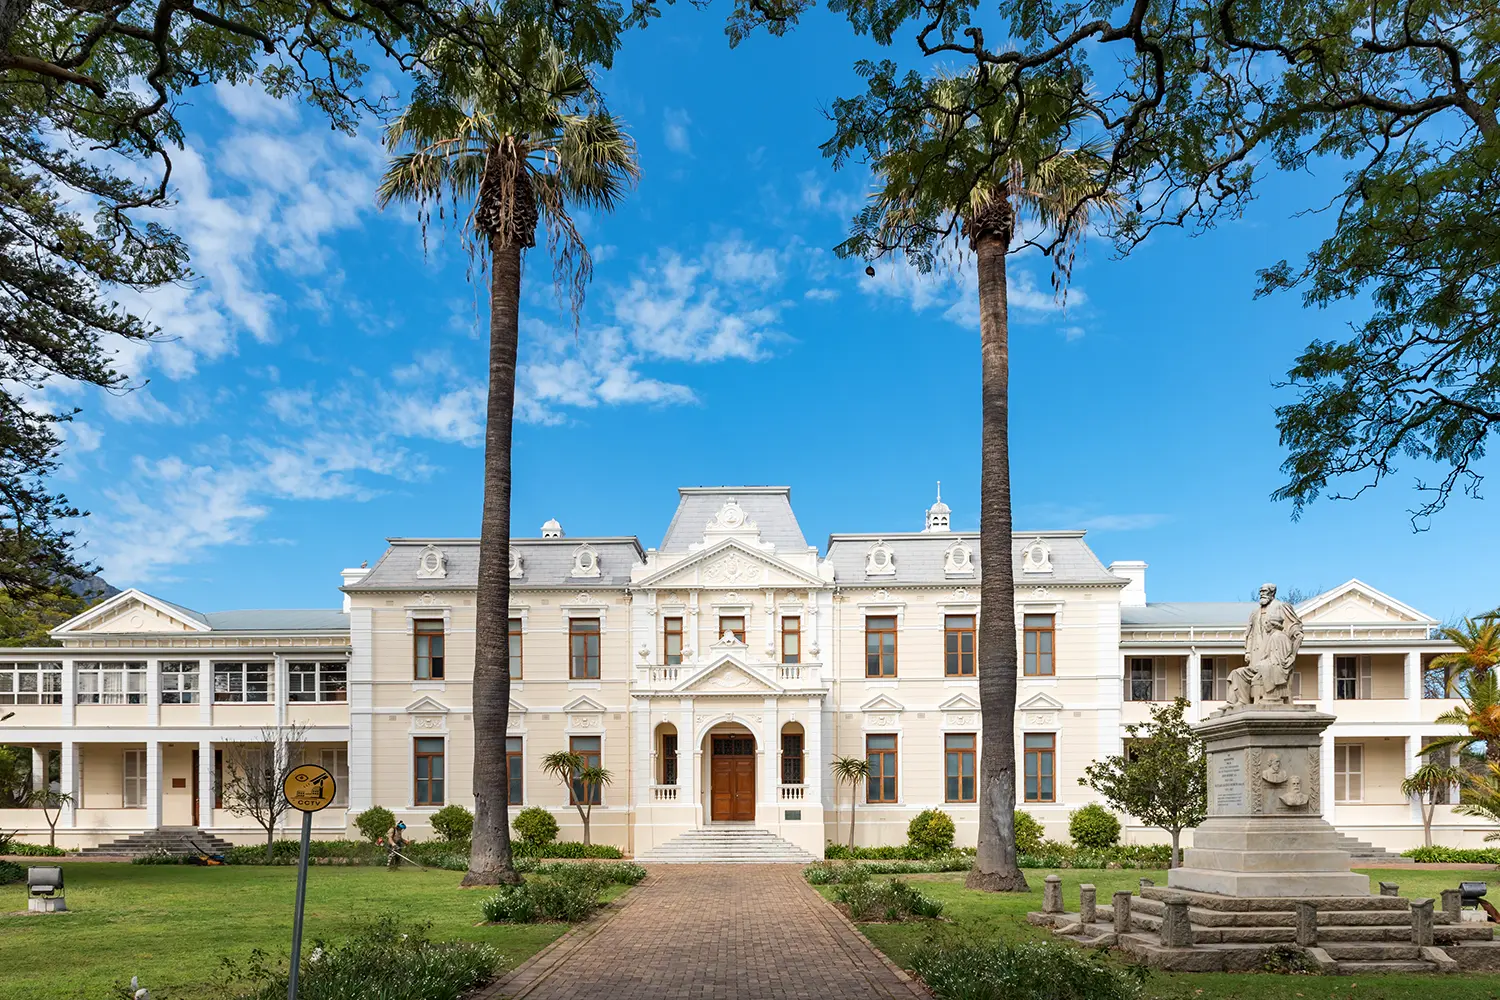 The Faculty of Theology of the University of Stellenbosch in South Africa